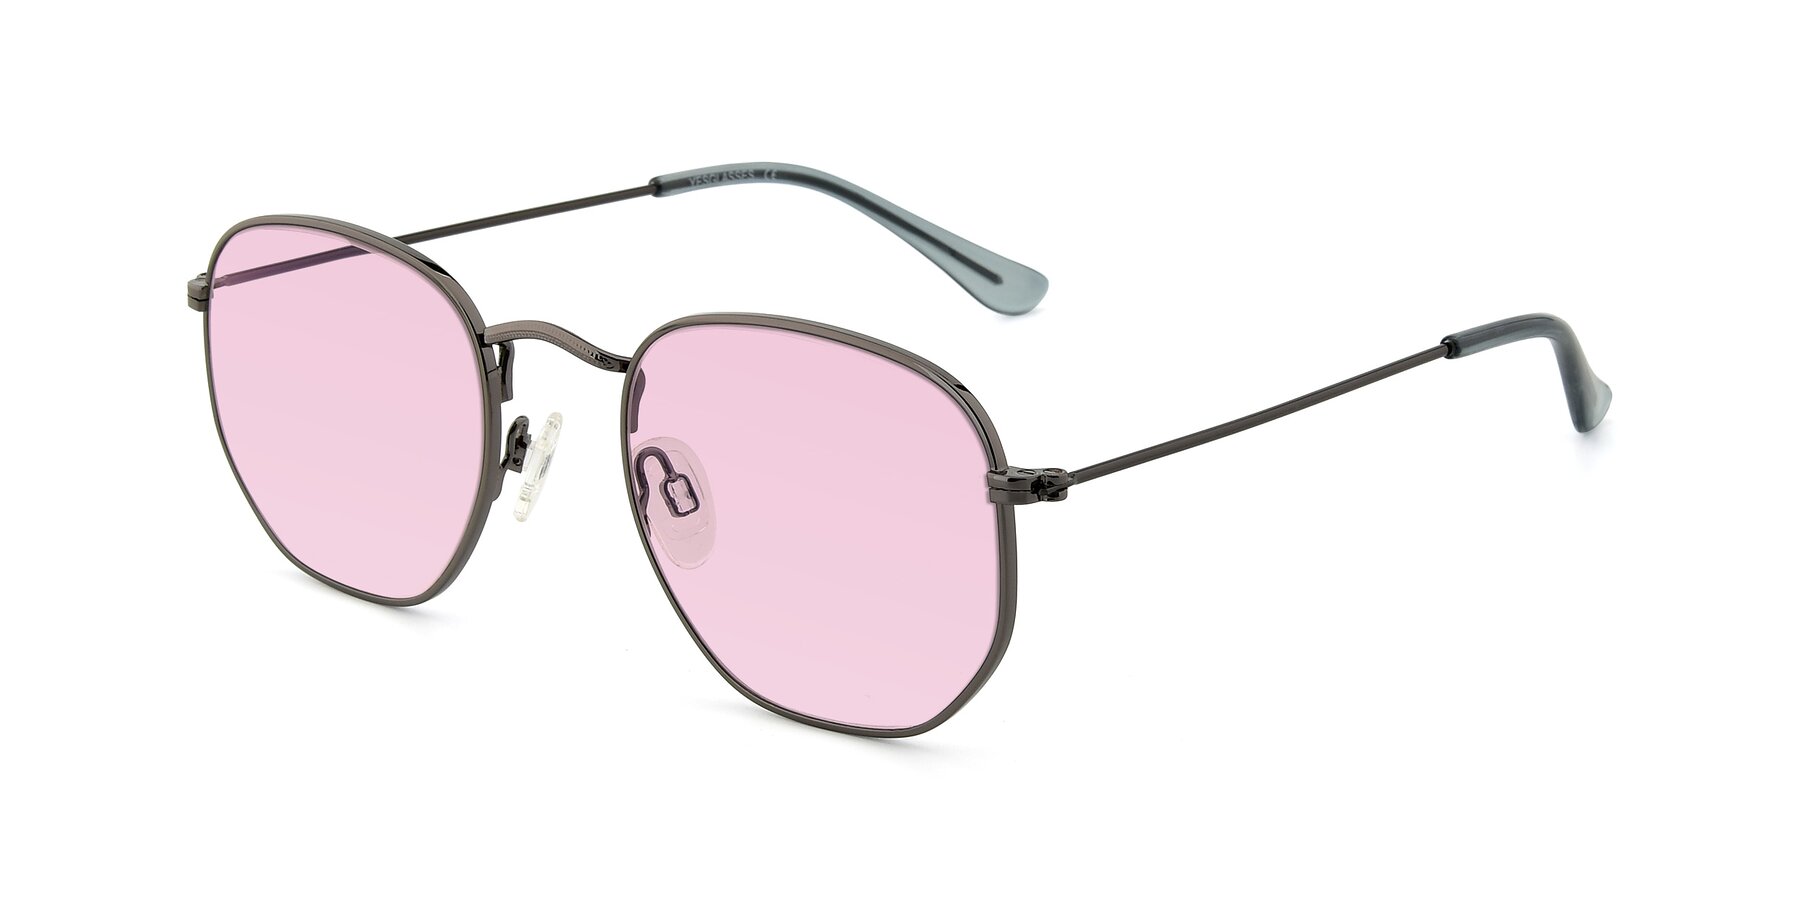 Angle of SSR1943 in Grey with Light Pink Tinted Lenses